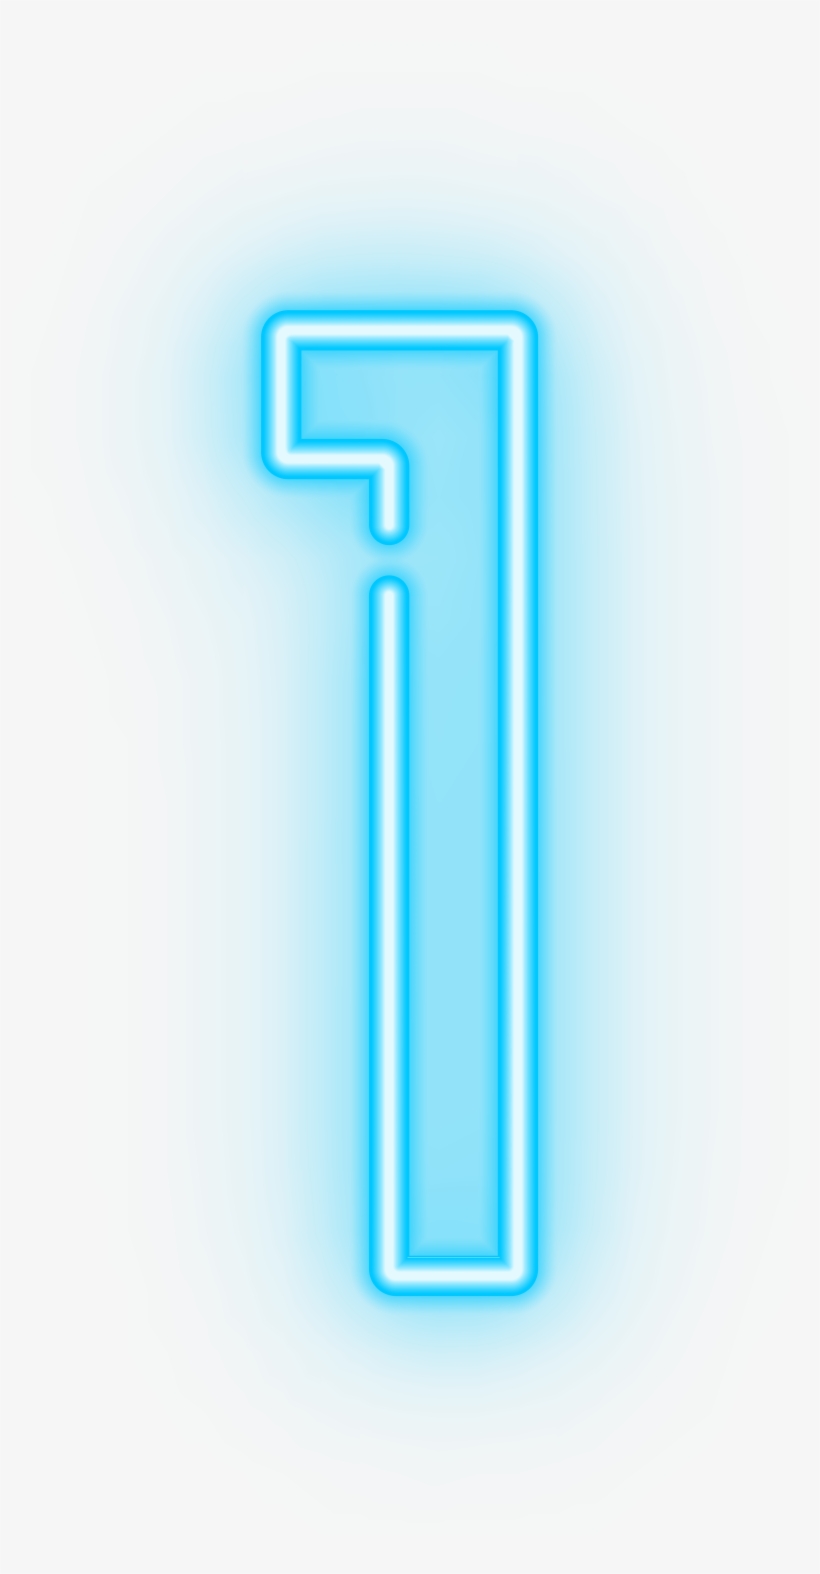 Neon Numbers Png, transparent png #123474